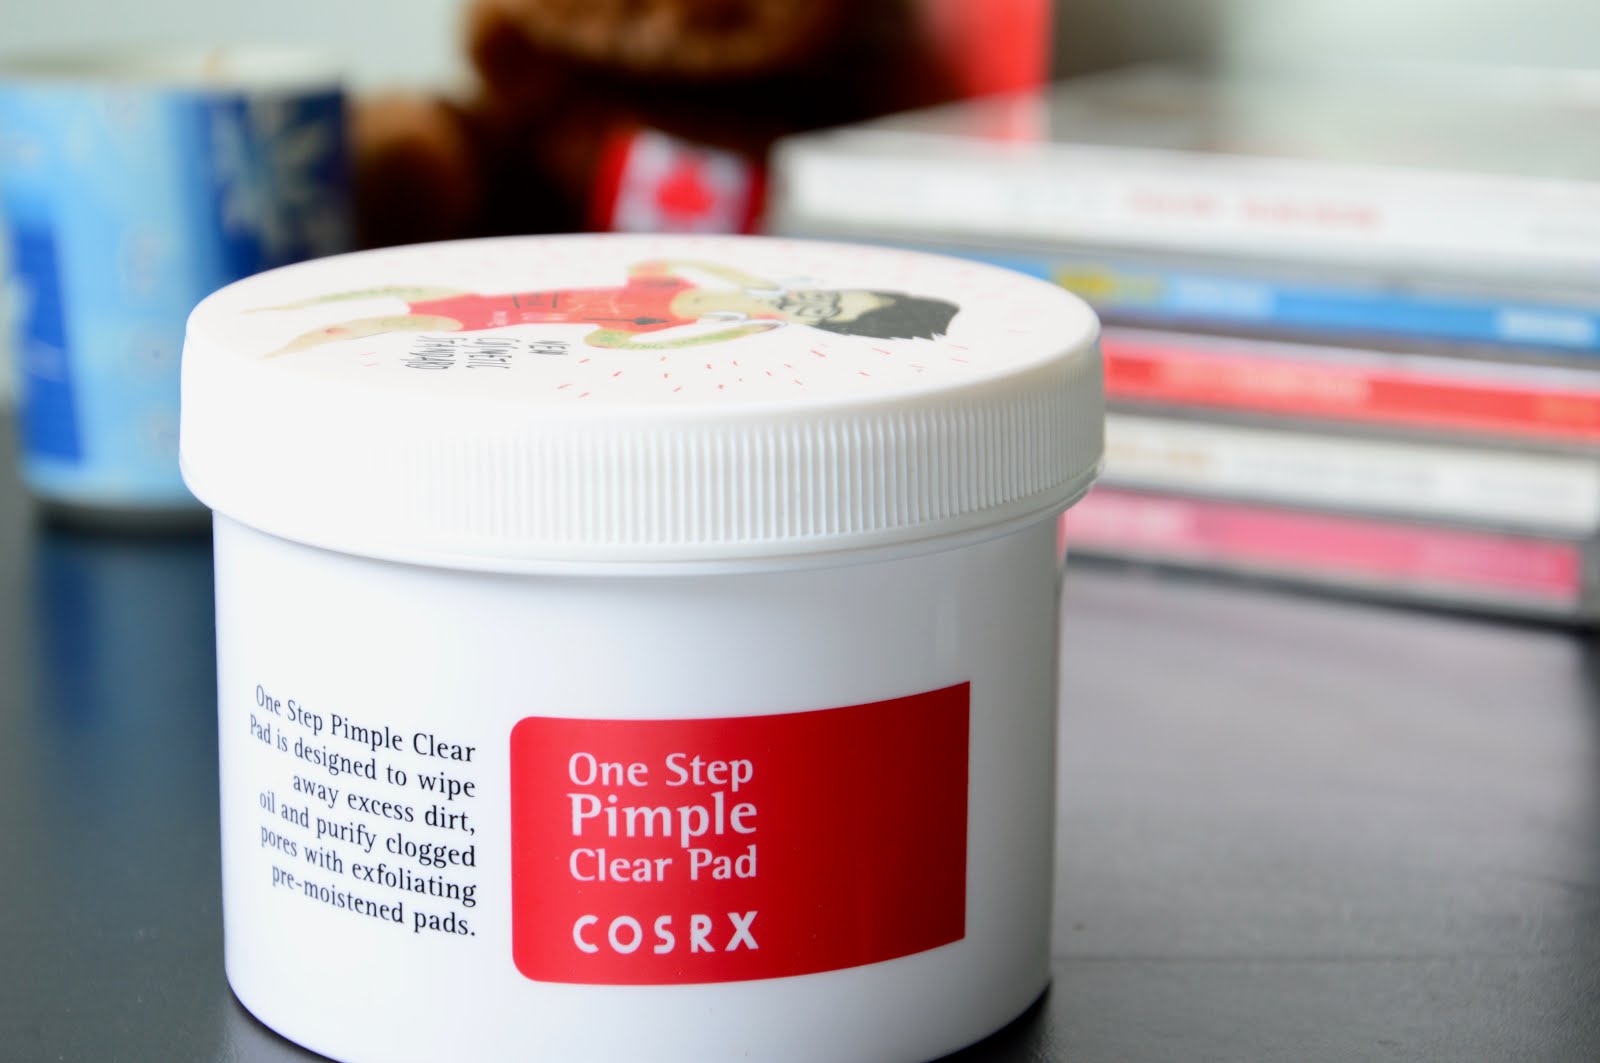 REVIEW COSRX One Step Pimple Clear Pad Review